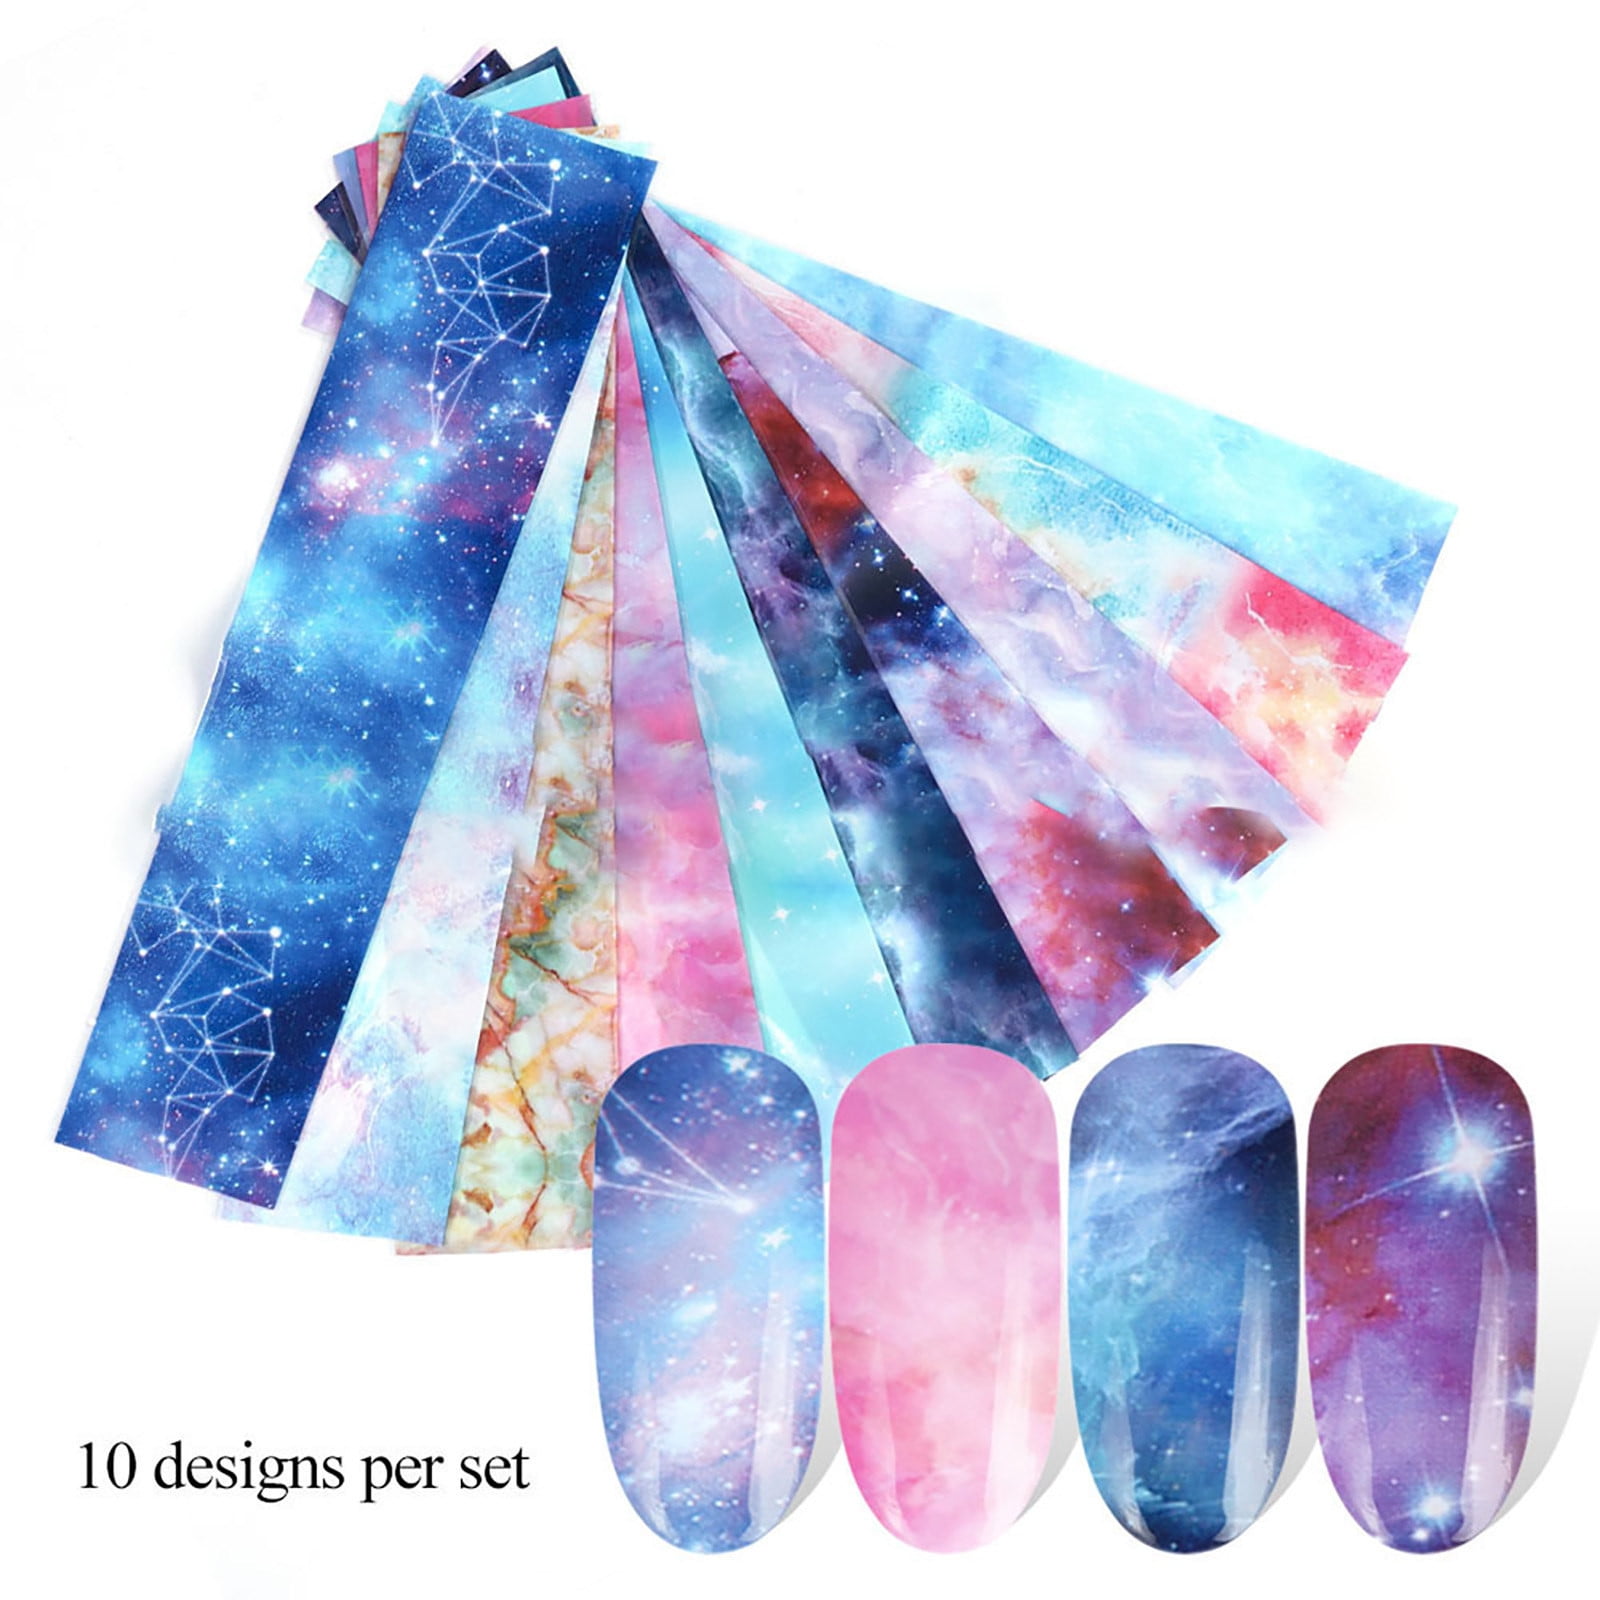 Nail Decals, Item #G4, Stickers and Decorations for Nails and Cell